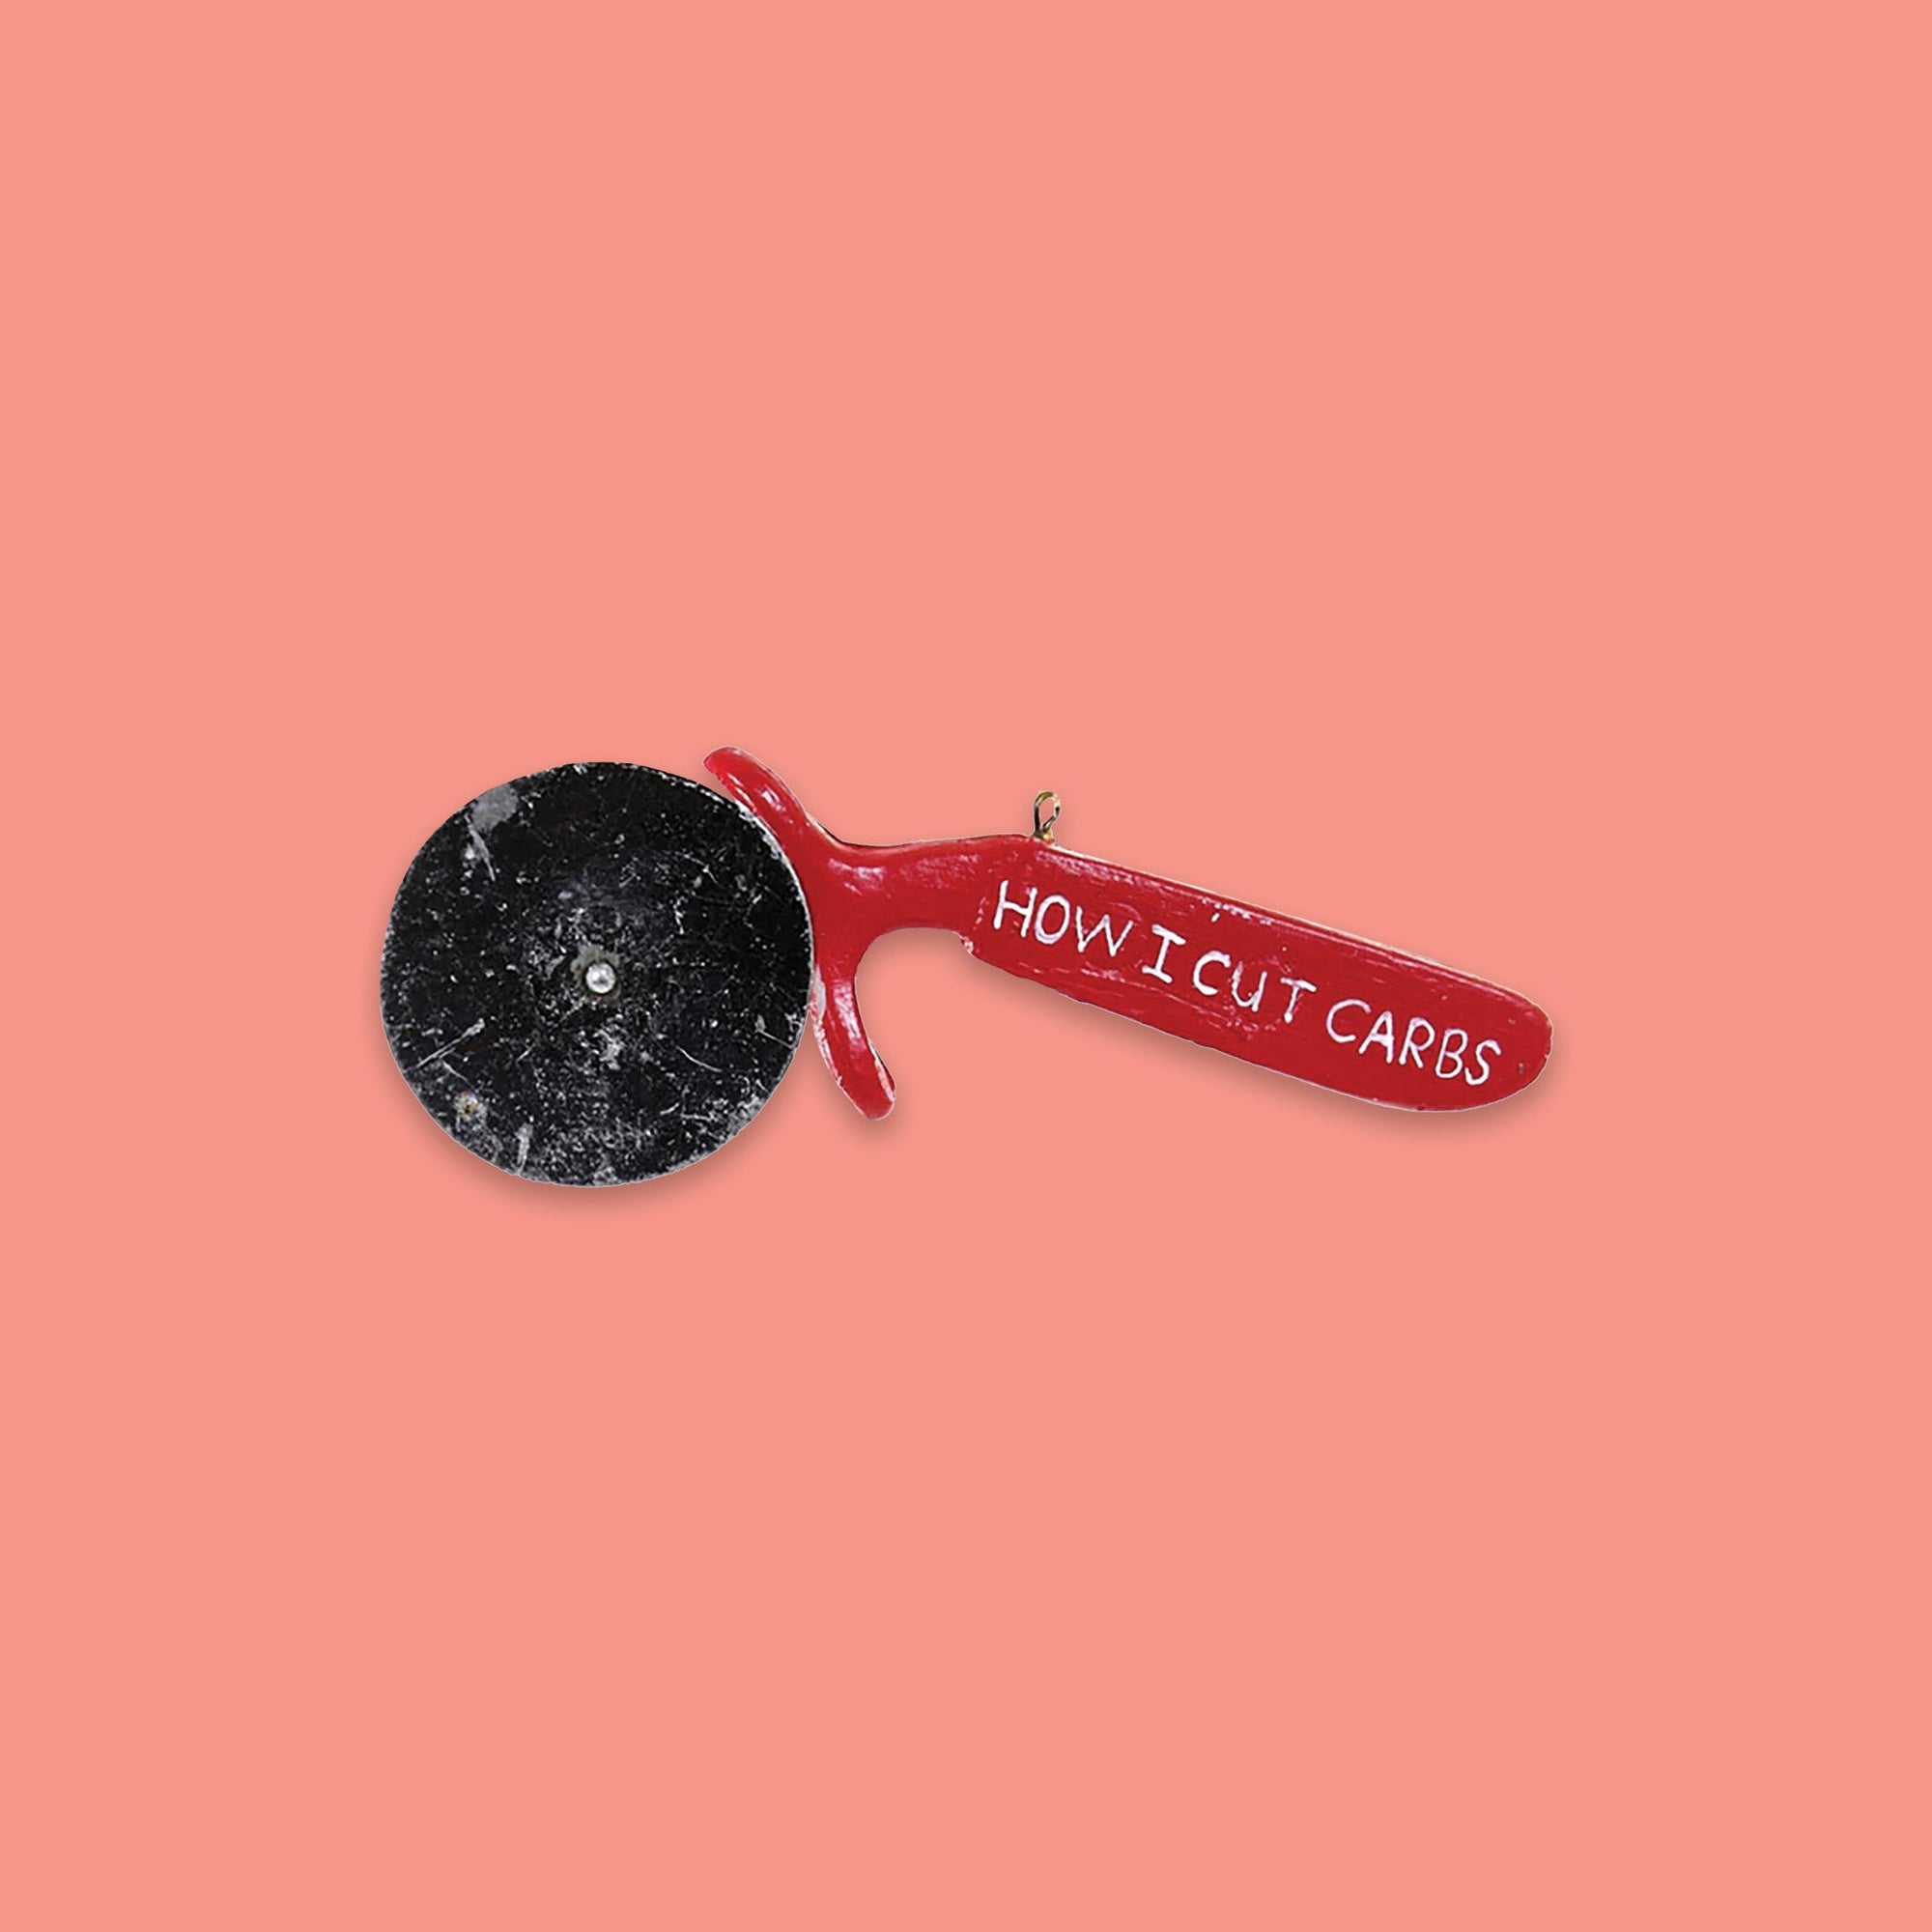 On a coral pink background sits a pizza cutter ornament. This is a glass pizza cutter ornament with a red handle and it says "HOW I CUT CARBS" in white lettering.